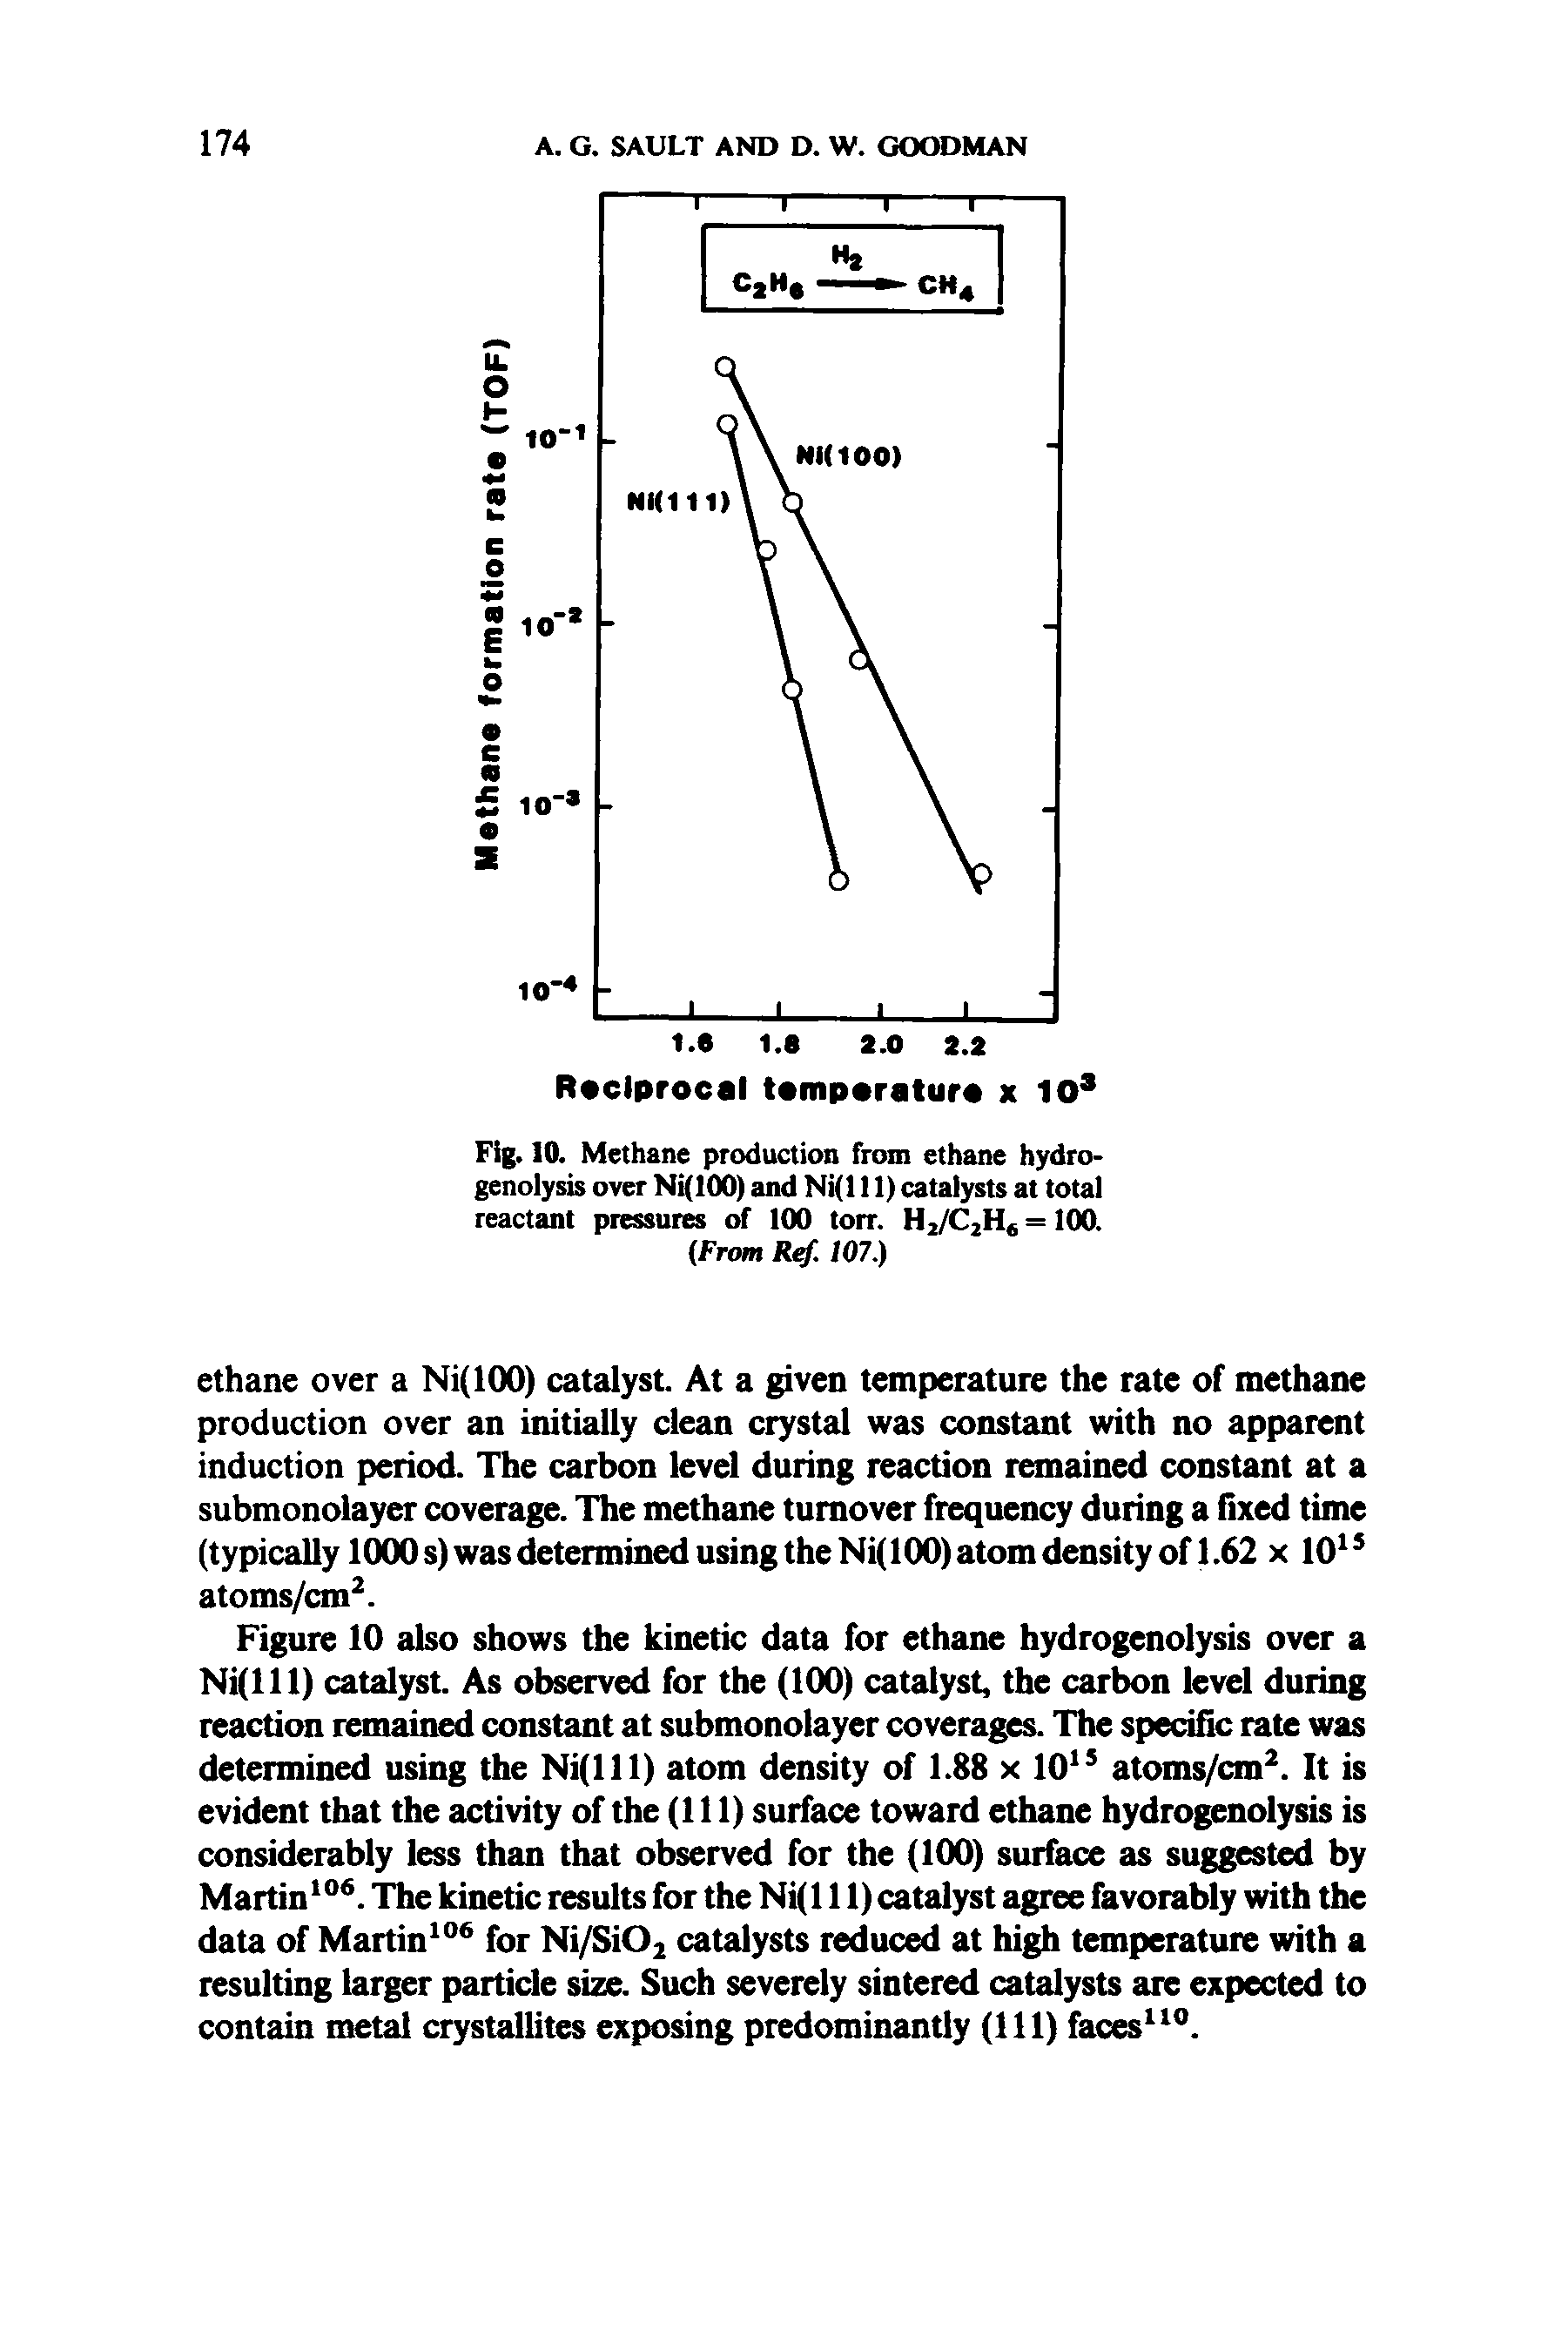 Fig. 10. Methane production from ethane hydro-genolysis over Ni(100) and Ni(l 11) catalysts at total reactant pressures of 100 torr. H2/C2H -100. (From R. 107.)...